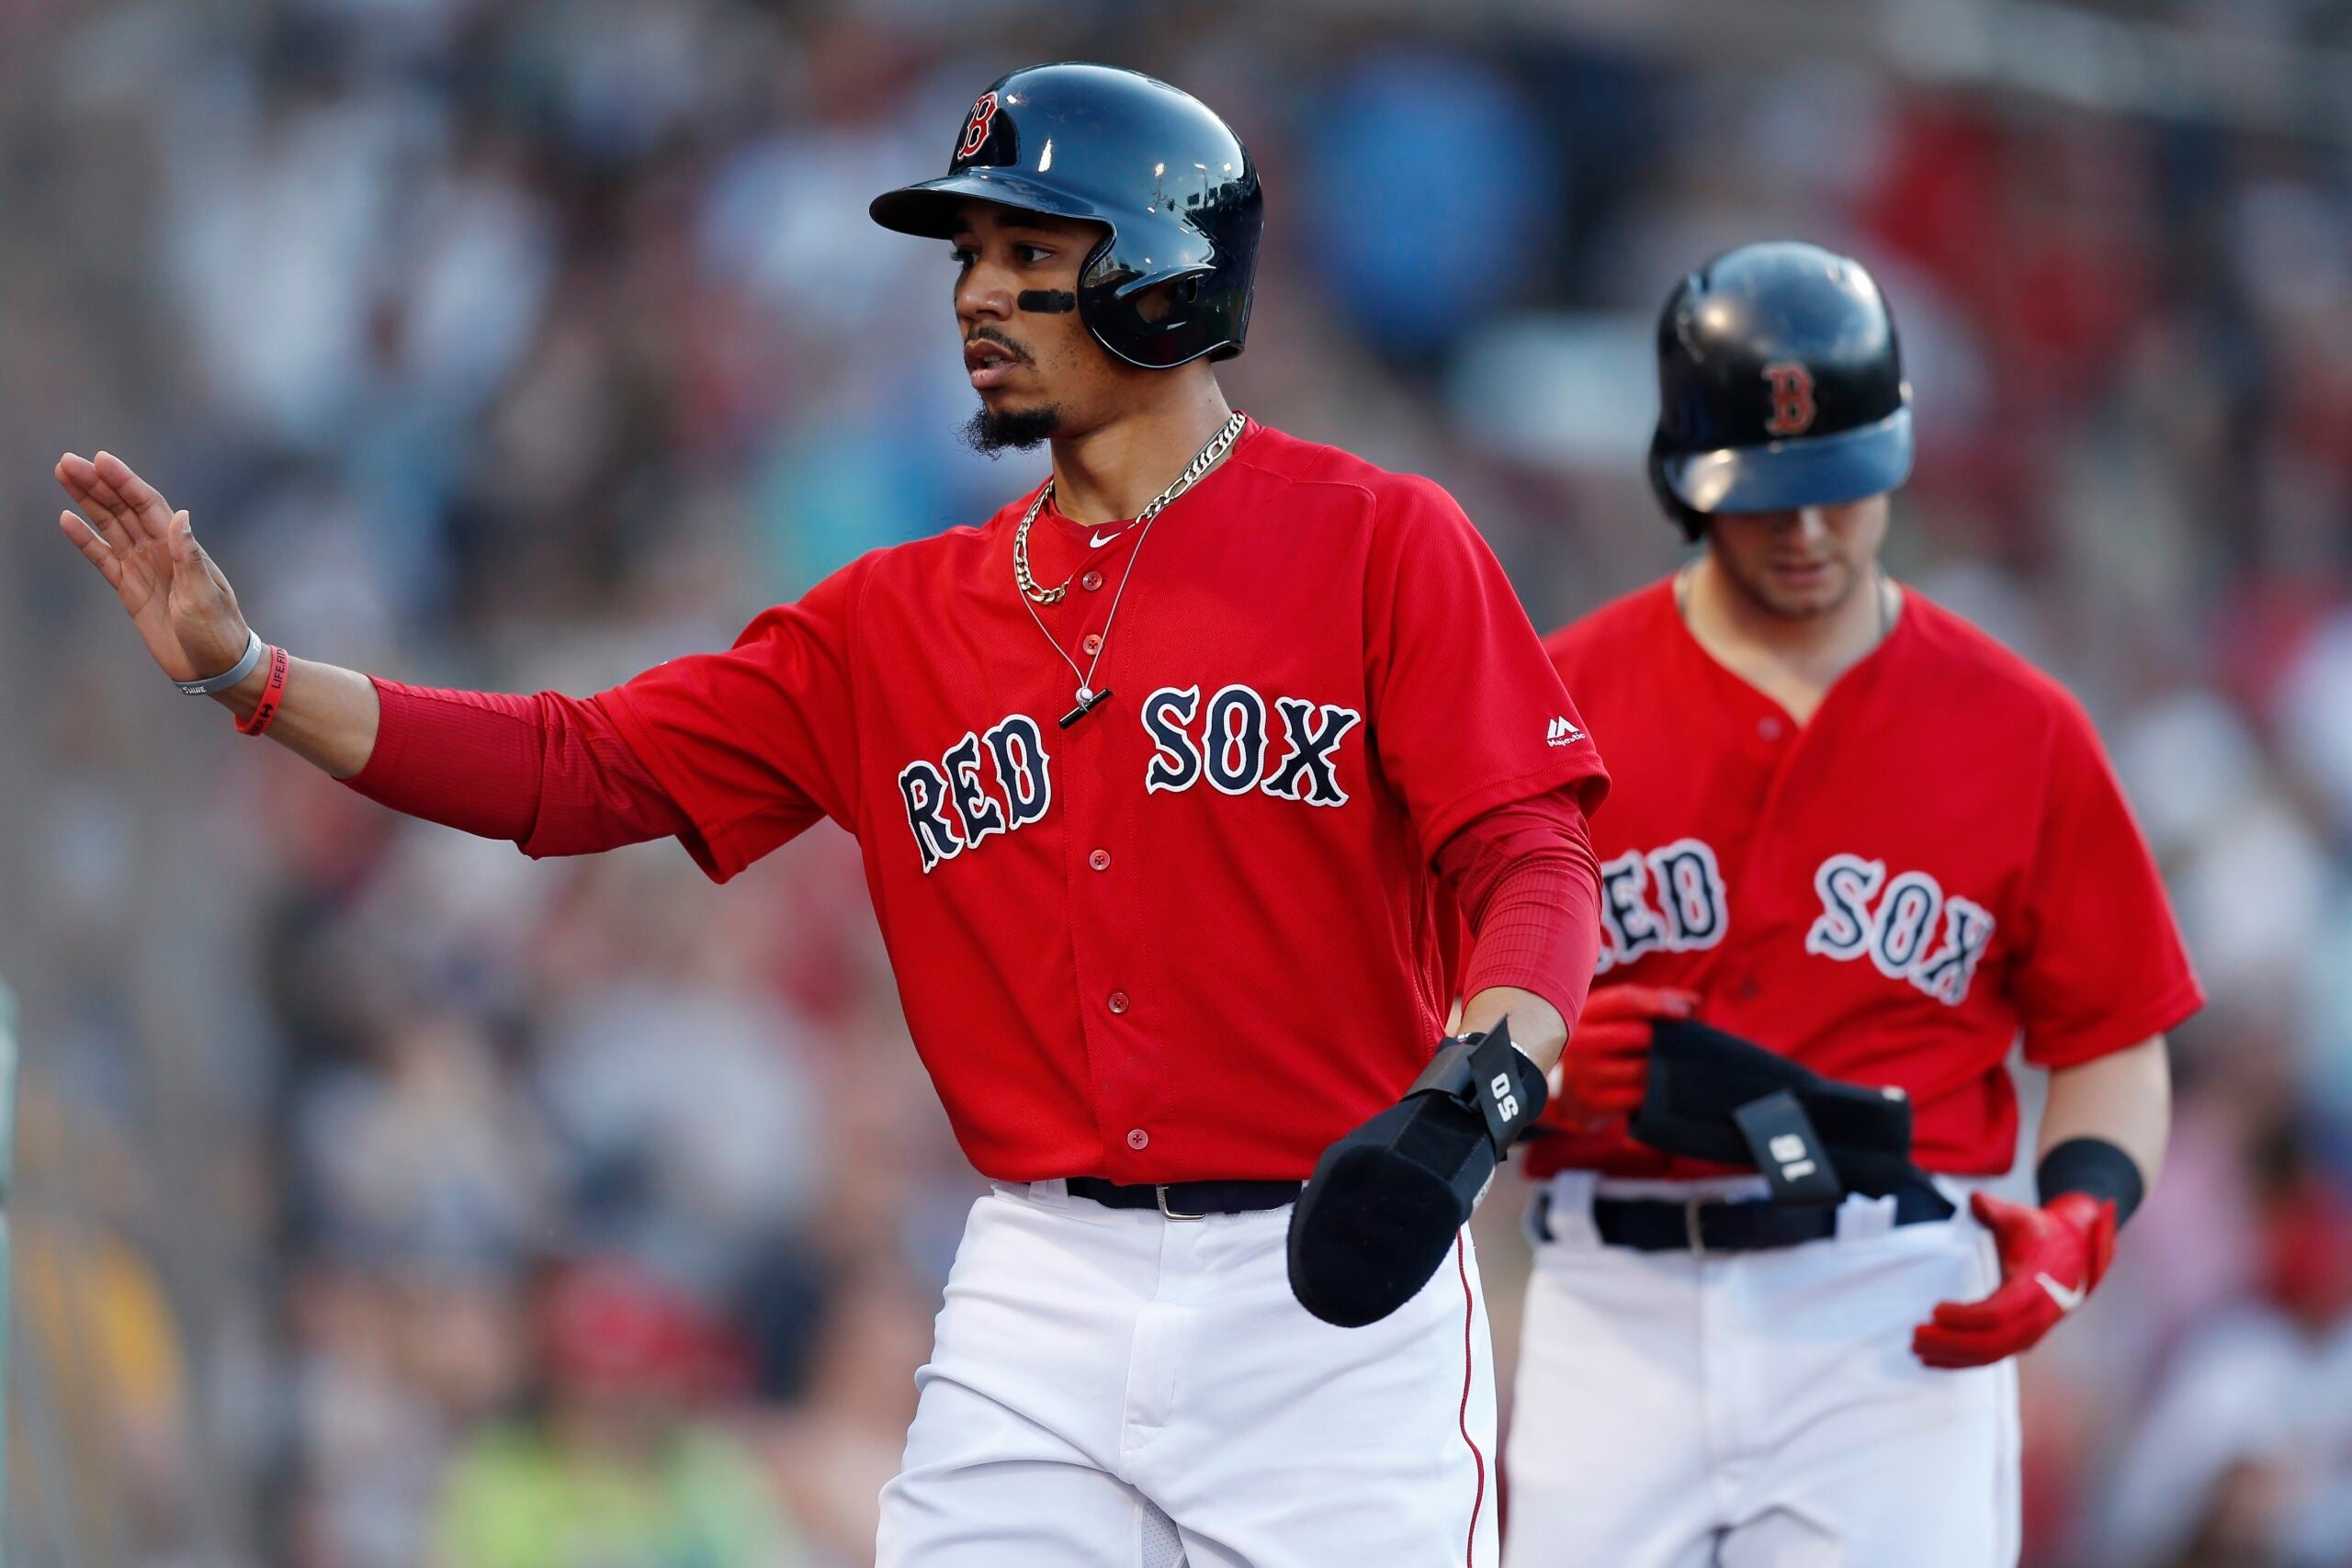 Sources: Red Sox trade former MVP Mookie Betts, David Price to Dodgers